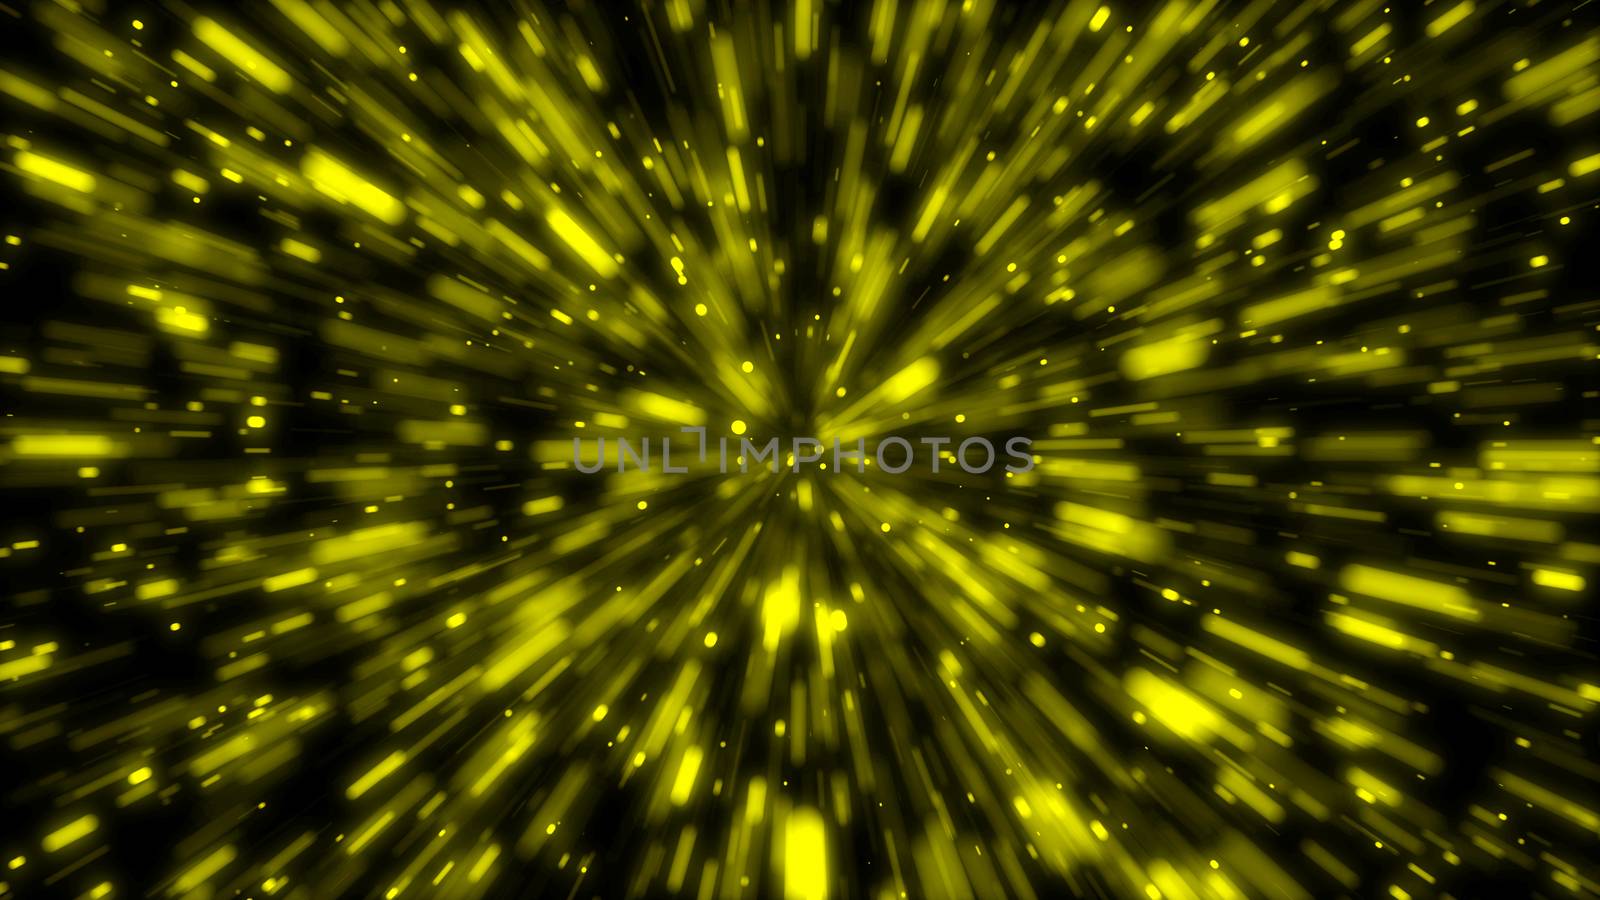 Particle or space traveling. Particle zoom background. 3d rendering